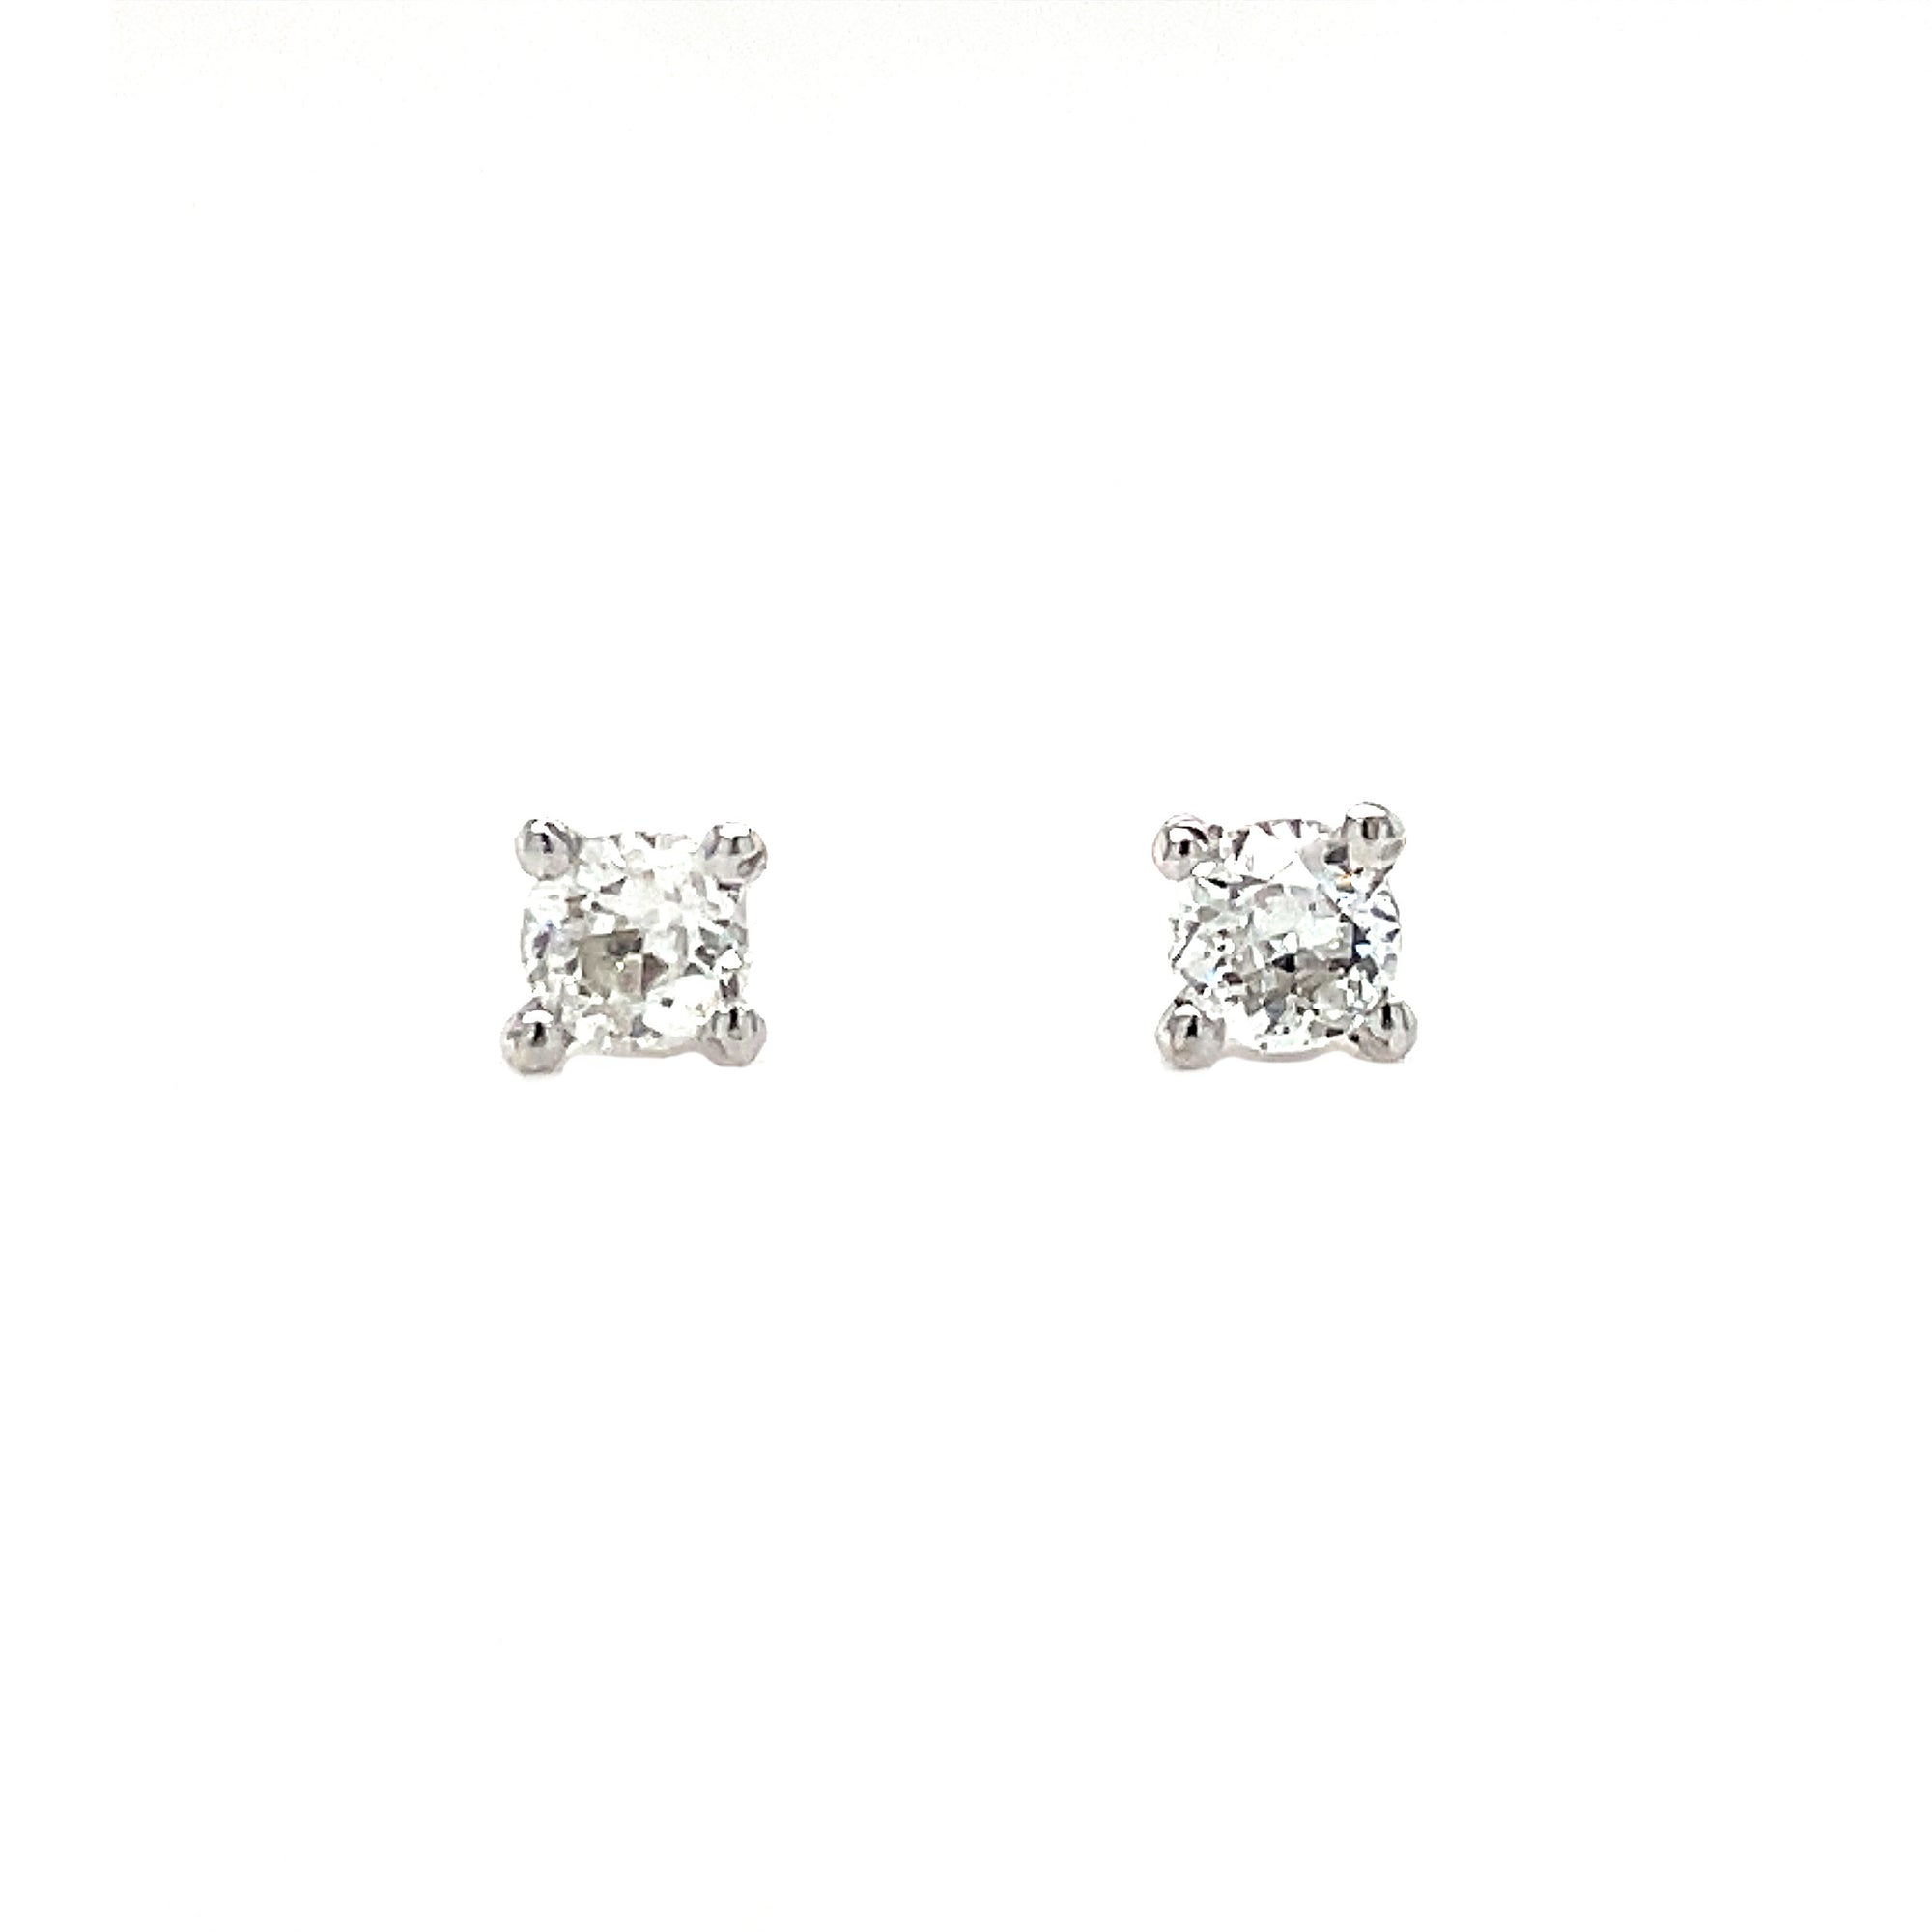 18ct White Diamond 4 Claw Round Stud Earrings